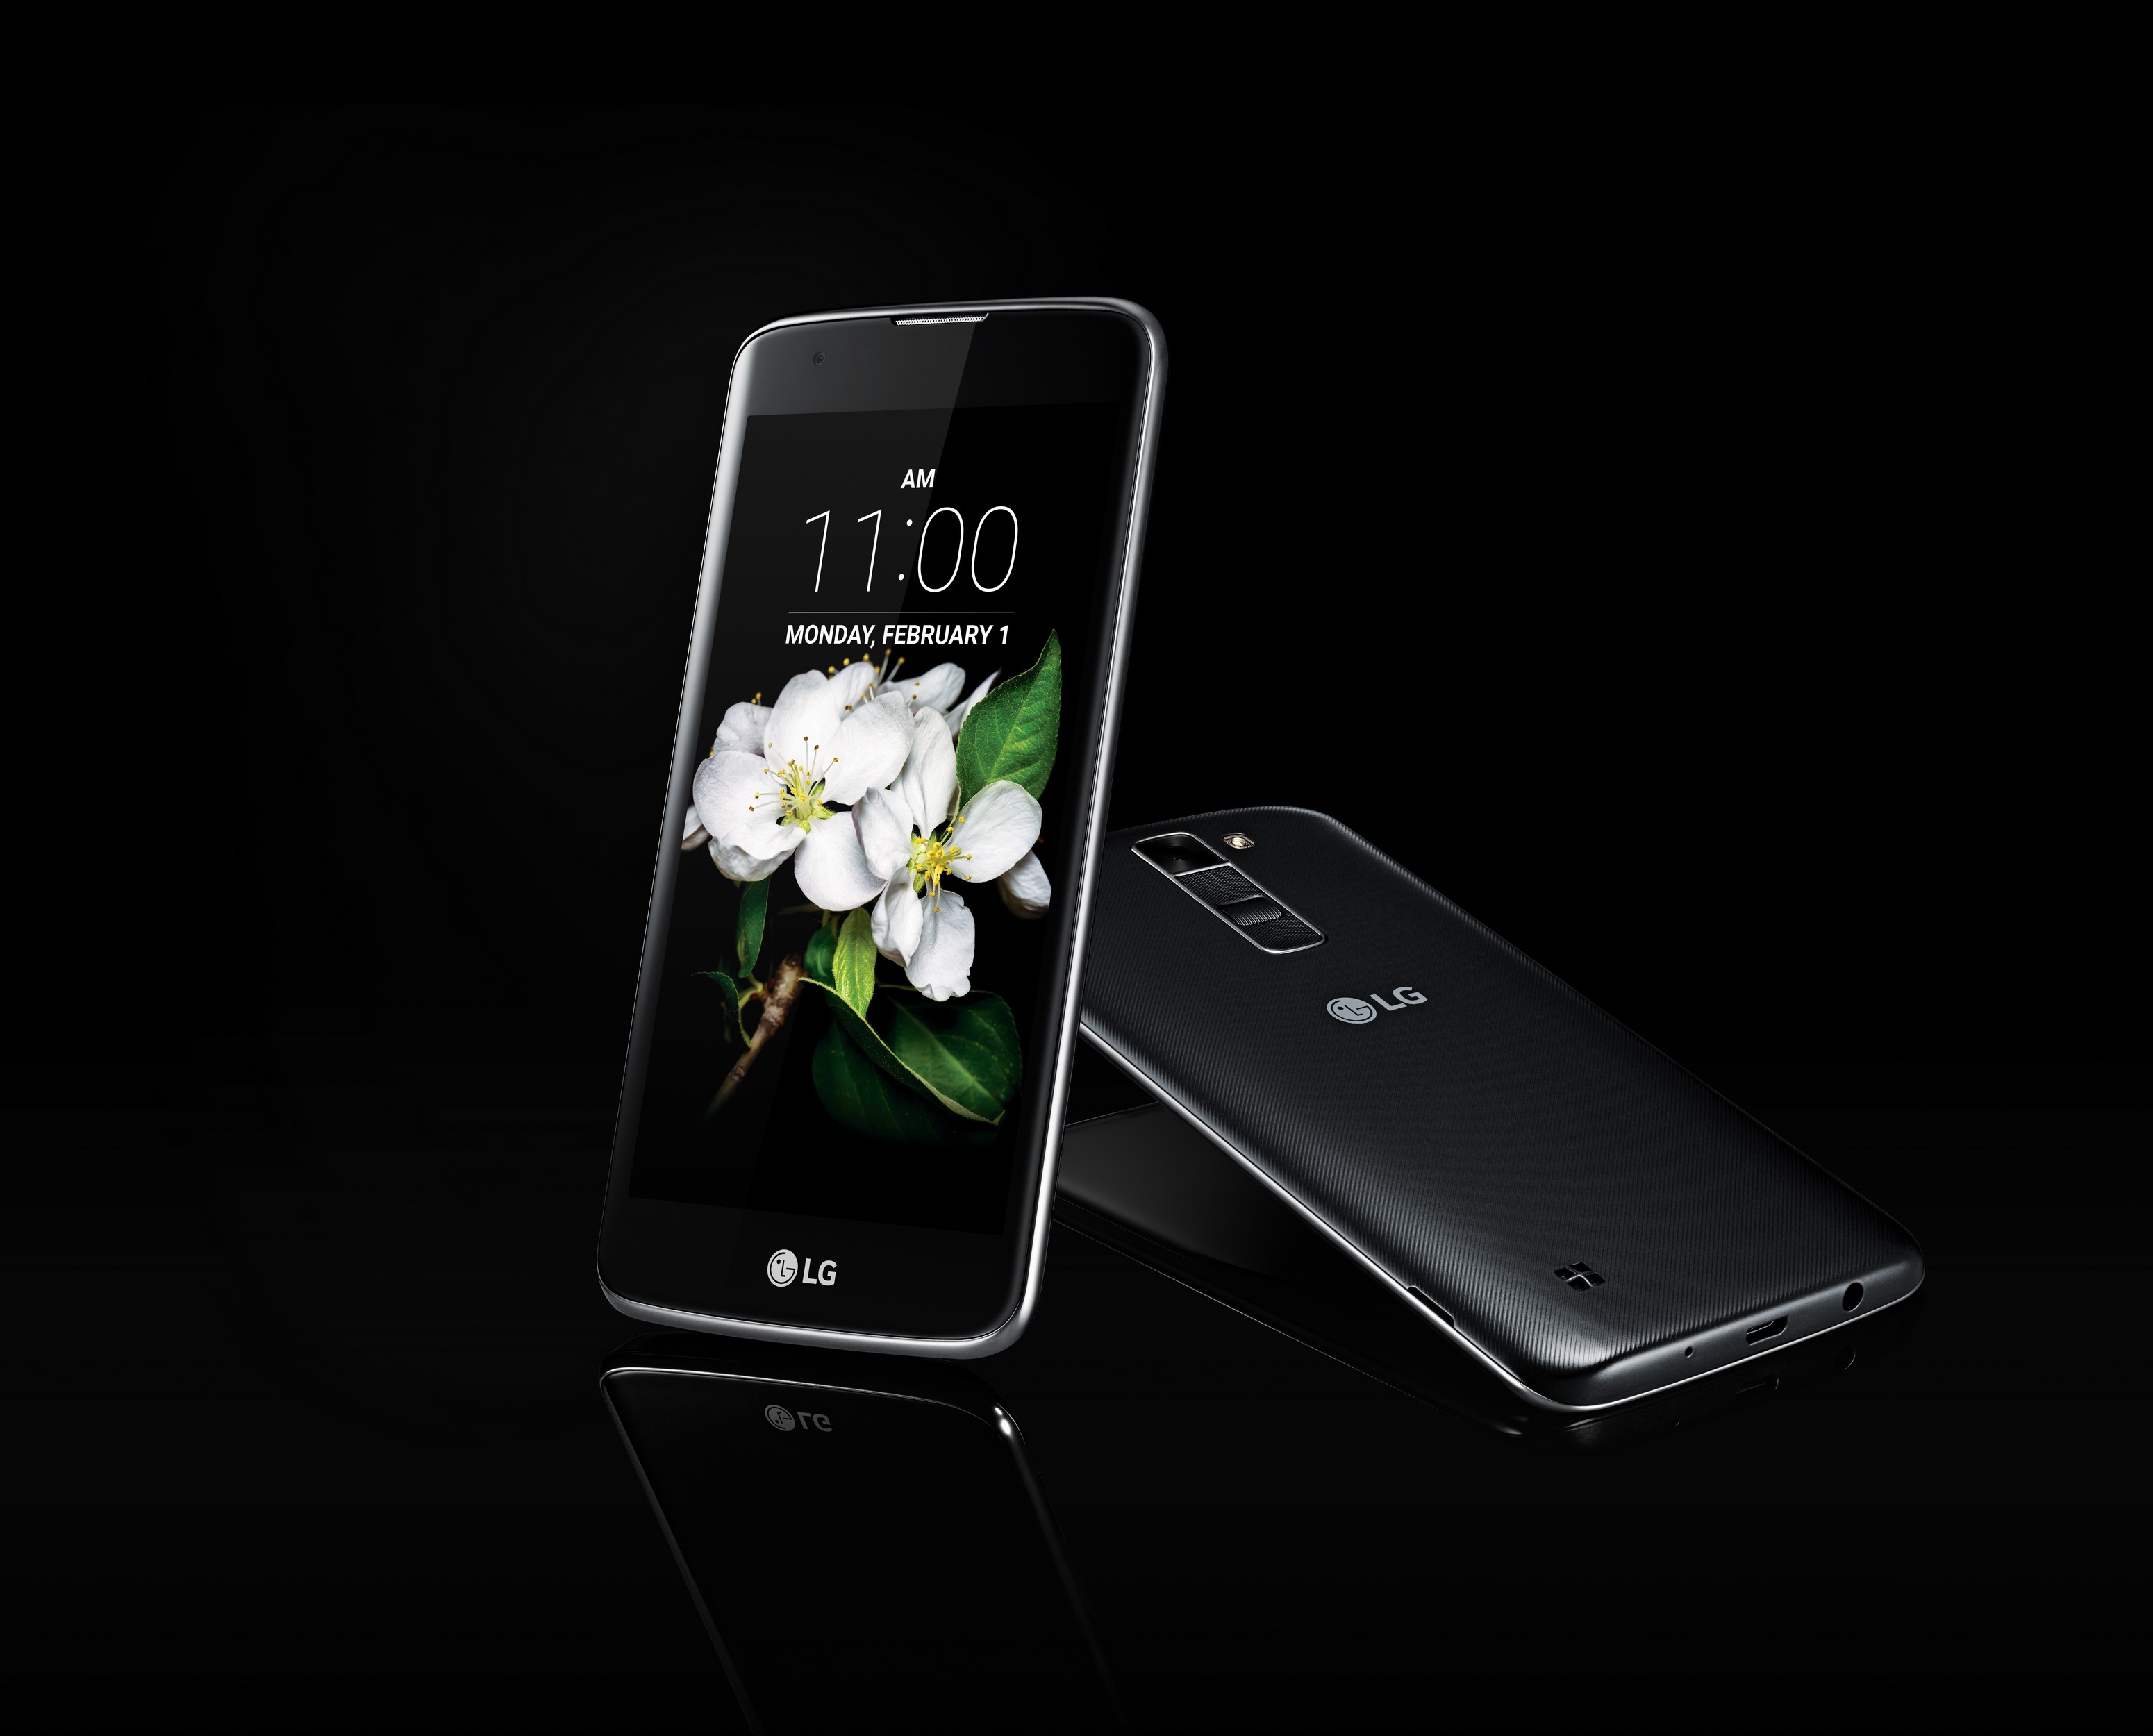 LG K7 Announced At CES 2016: Specifications & Features